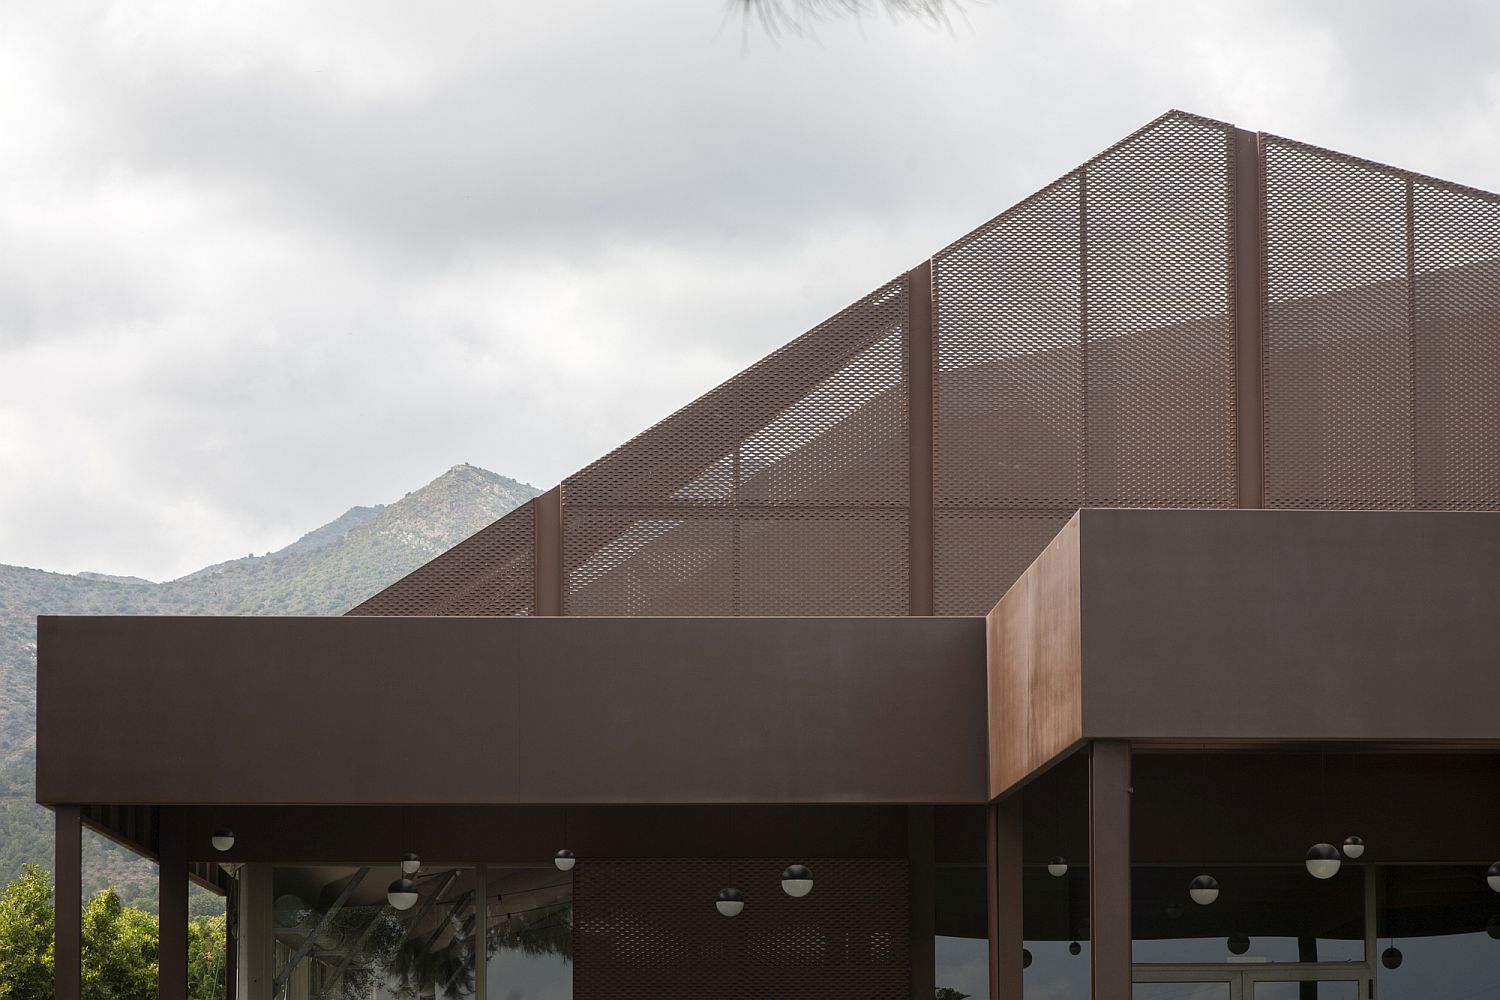 Corten steel reflects the color of the soil while blending different industrial elements